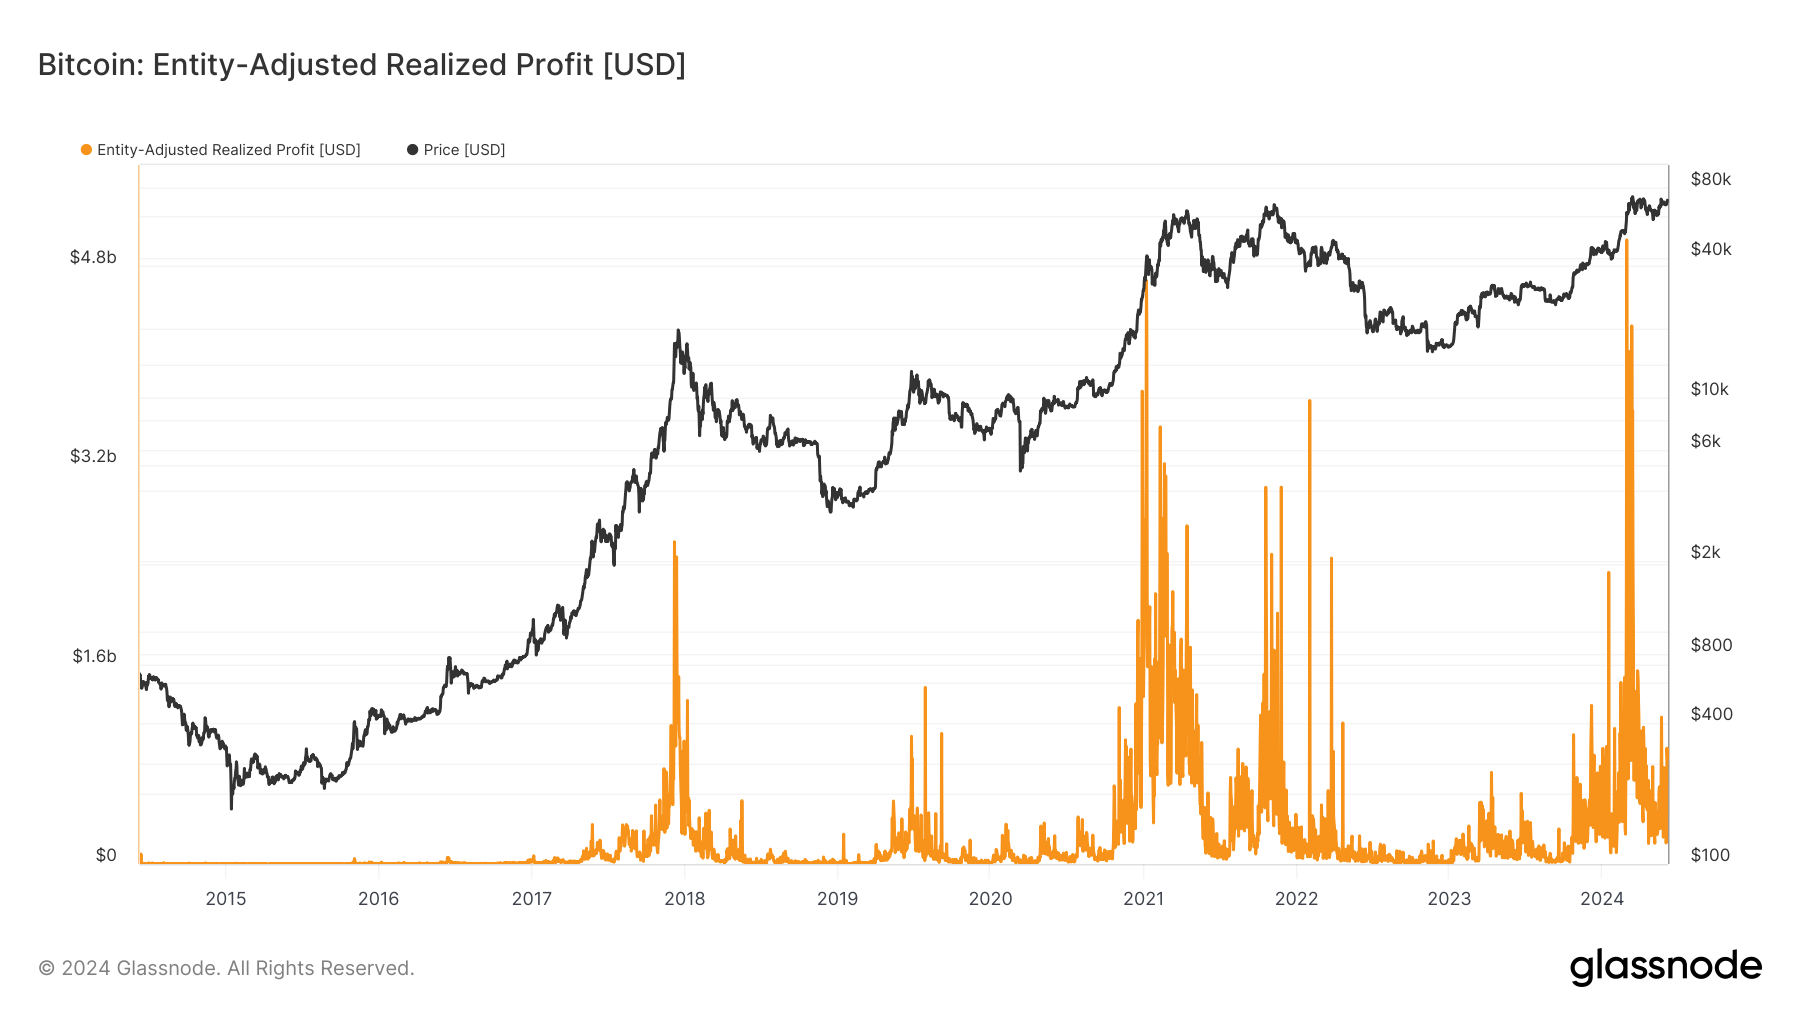 Market accumulation drove Bitcoin’s realized profits to all-time high pre-halving